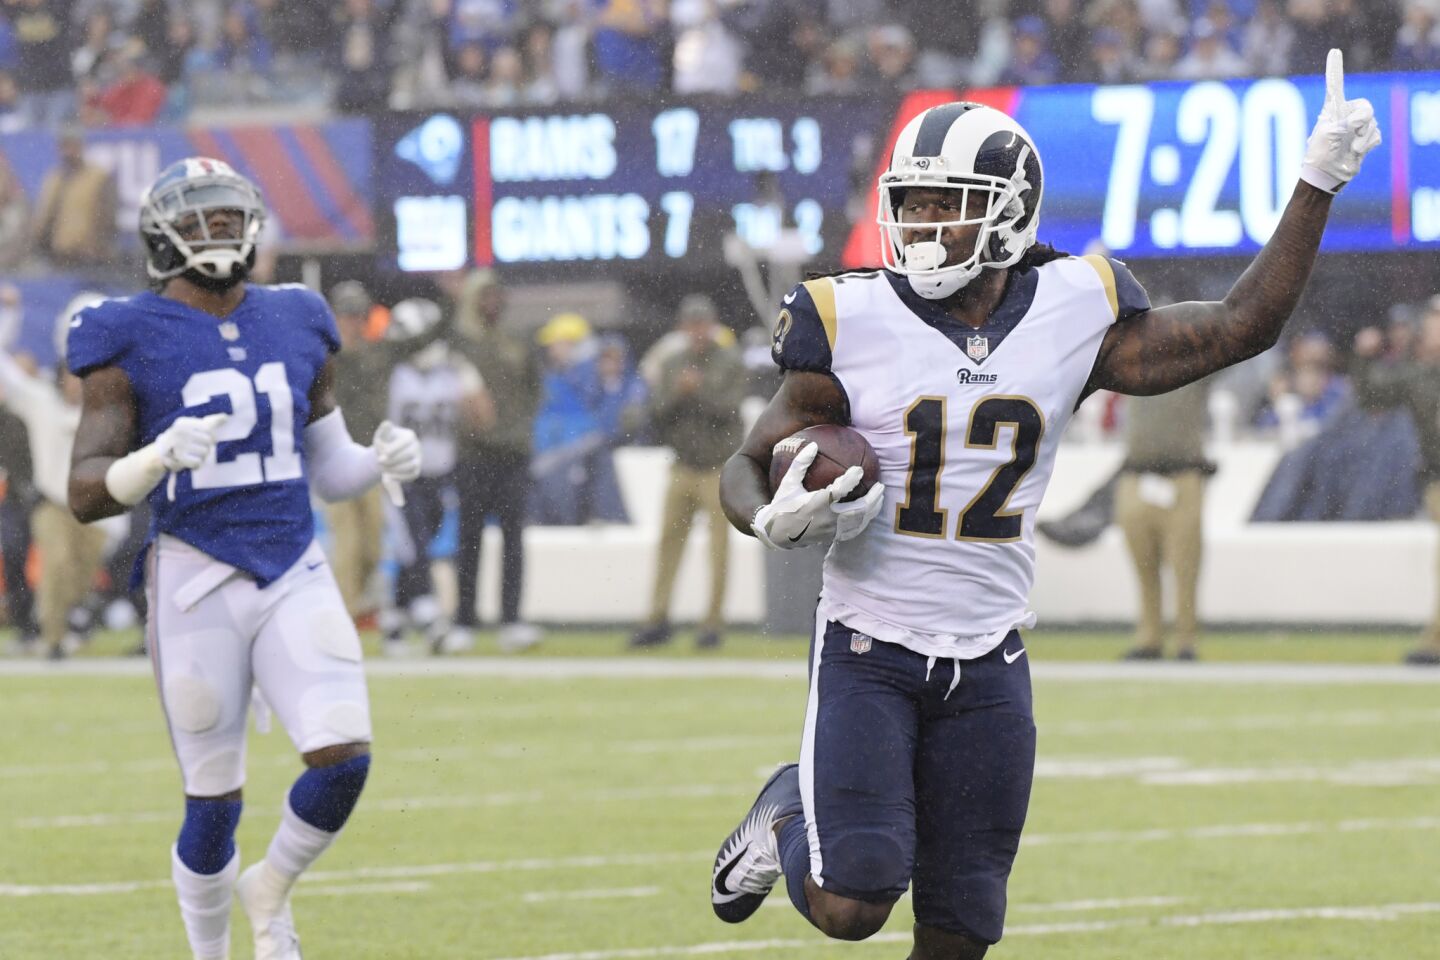 Rams wide receiver Sammy Watkins celebrates as he runs away from Giants safety Landon Collins for a 67-yard touchdown during the first half on Sunday.